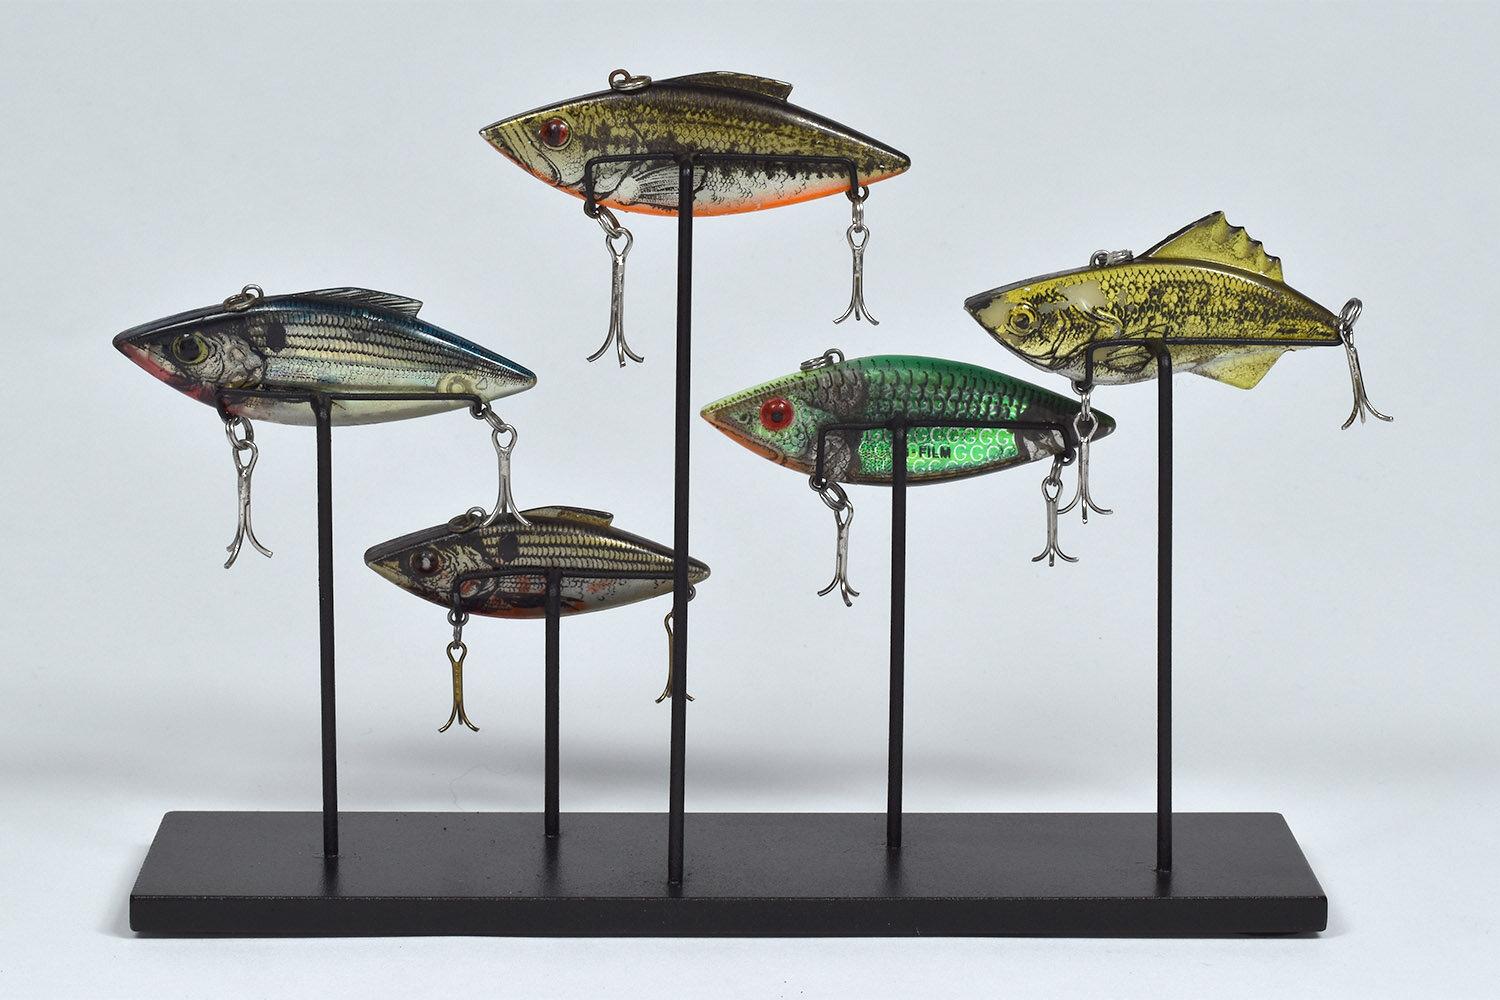 Group of five freshwater fishing lures collected from Lake Tahoe, California.

Part of a large group of lures collected over several years from the bottom of Lake Tahoe by a father and son as competitive sport and summer fun. The age and condition